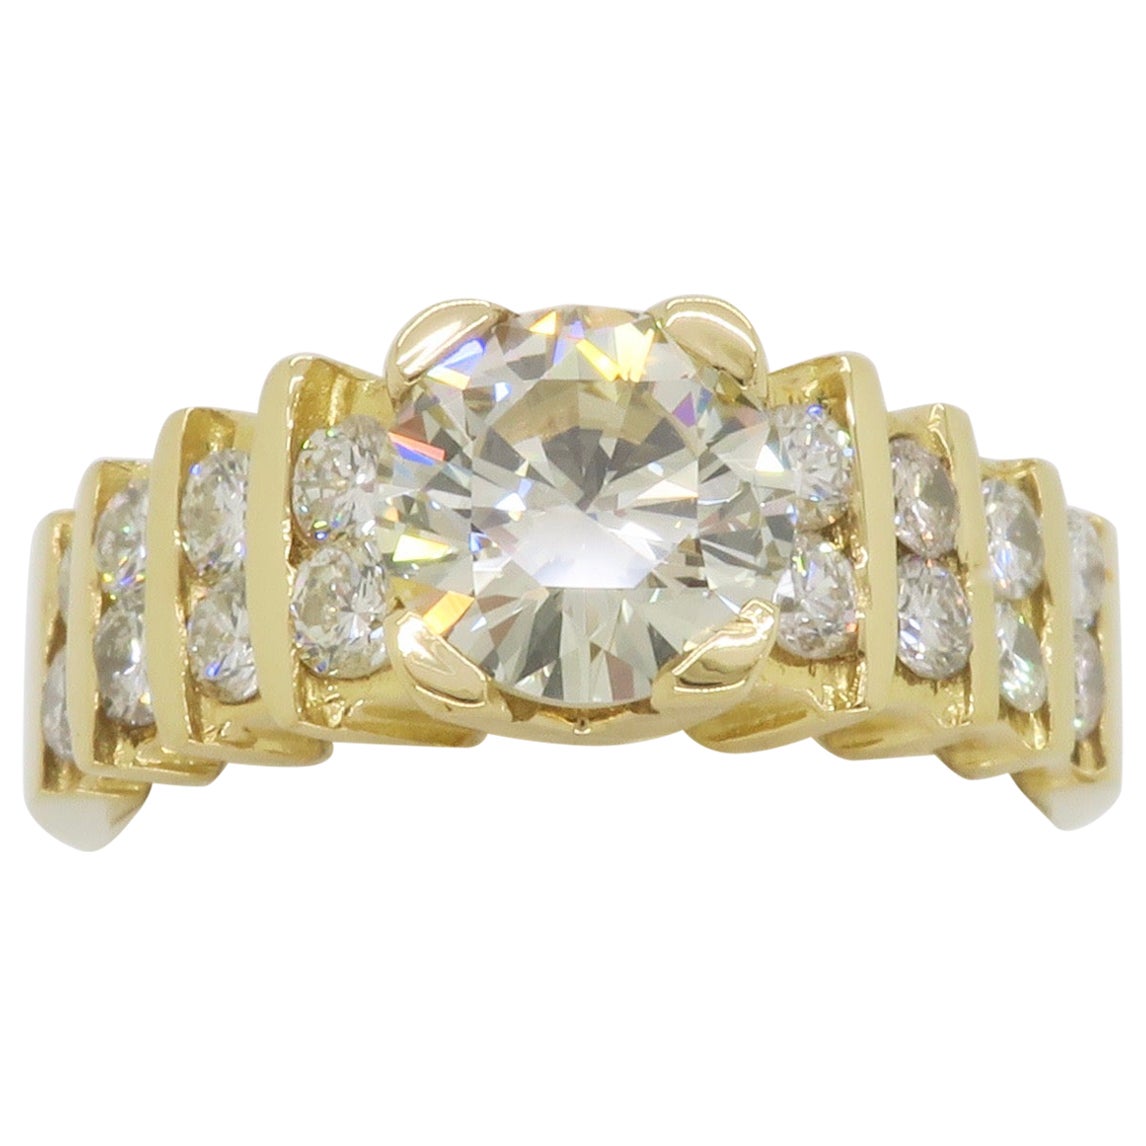 1.54ctw Diamond Encrusted Ring in 14k Yellow Gold For Sale